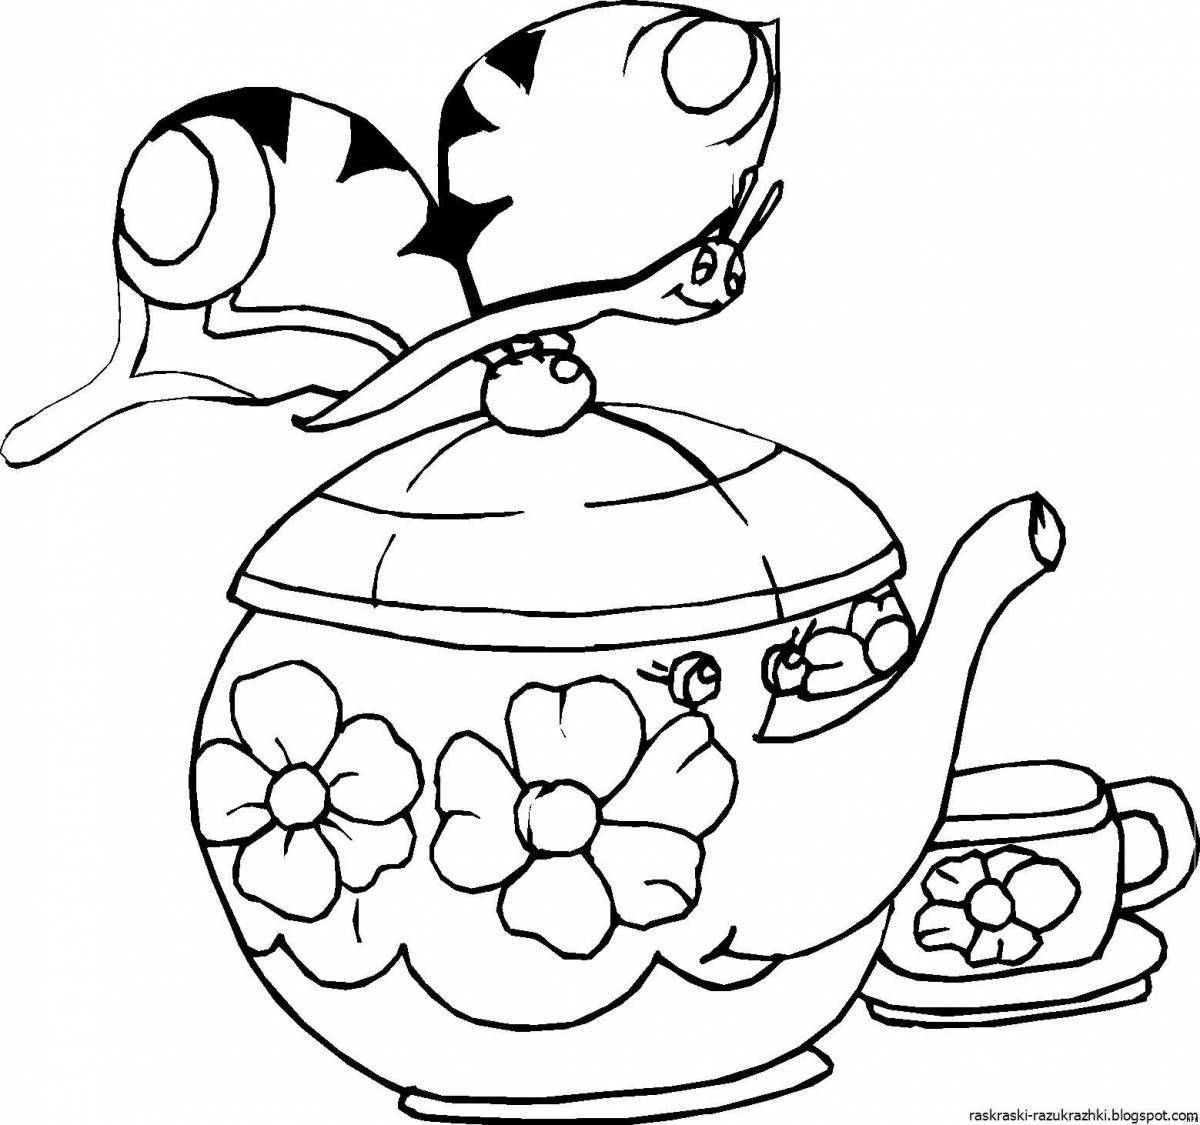 Gorgeous teapot coloring page for 2-3 year olds